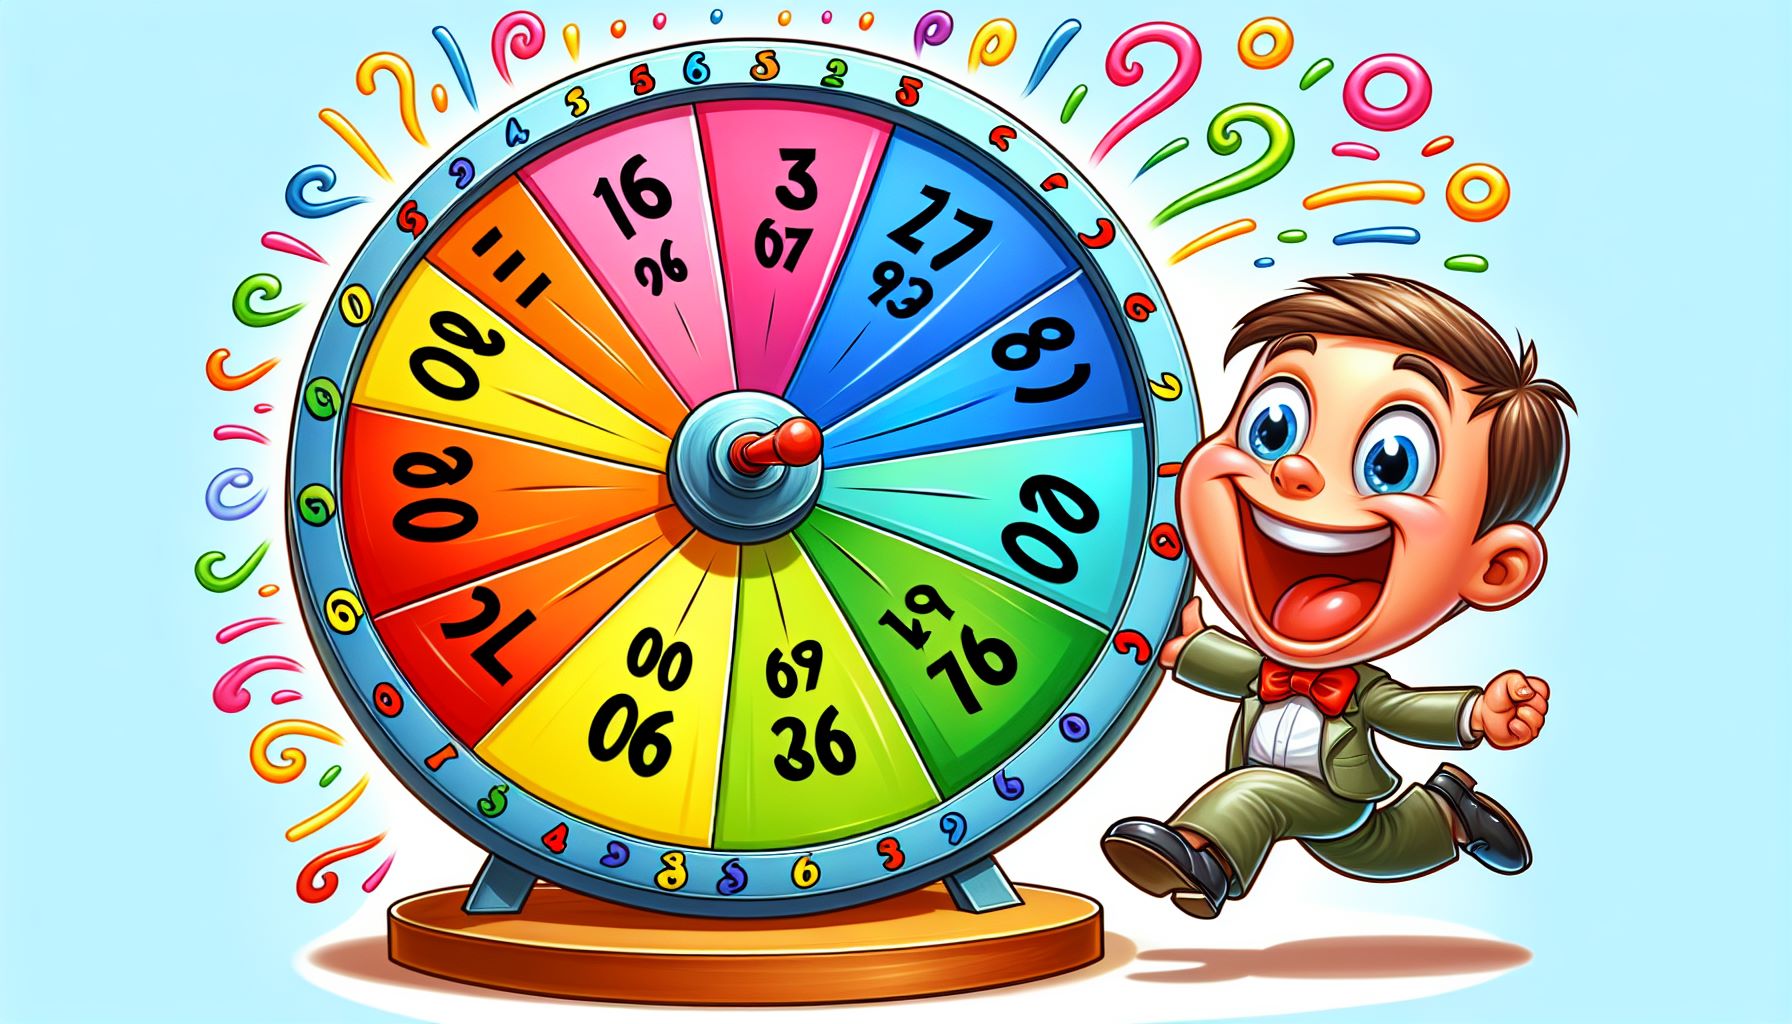 Cartoon of interactive spinning wheel for number selection